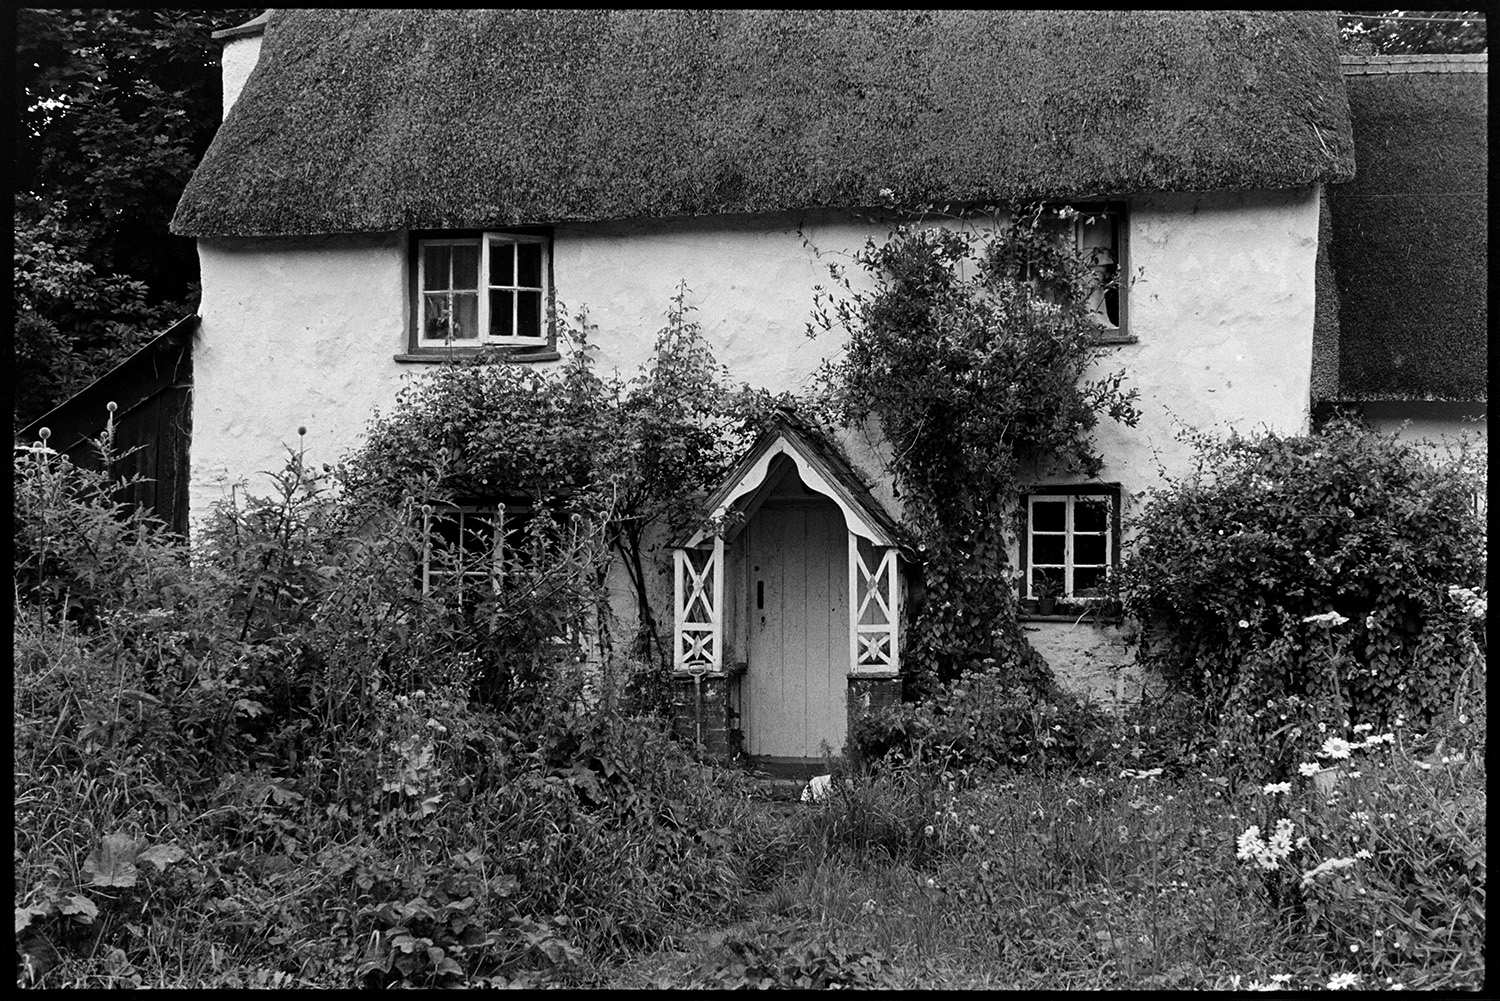 The front of the thatched cottage where the Ravilious family lived at Addisford, Dolton. Flowers can be seen in the garden in front of the cottage which is overgrown.